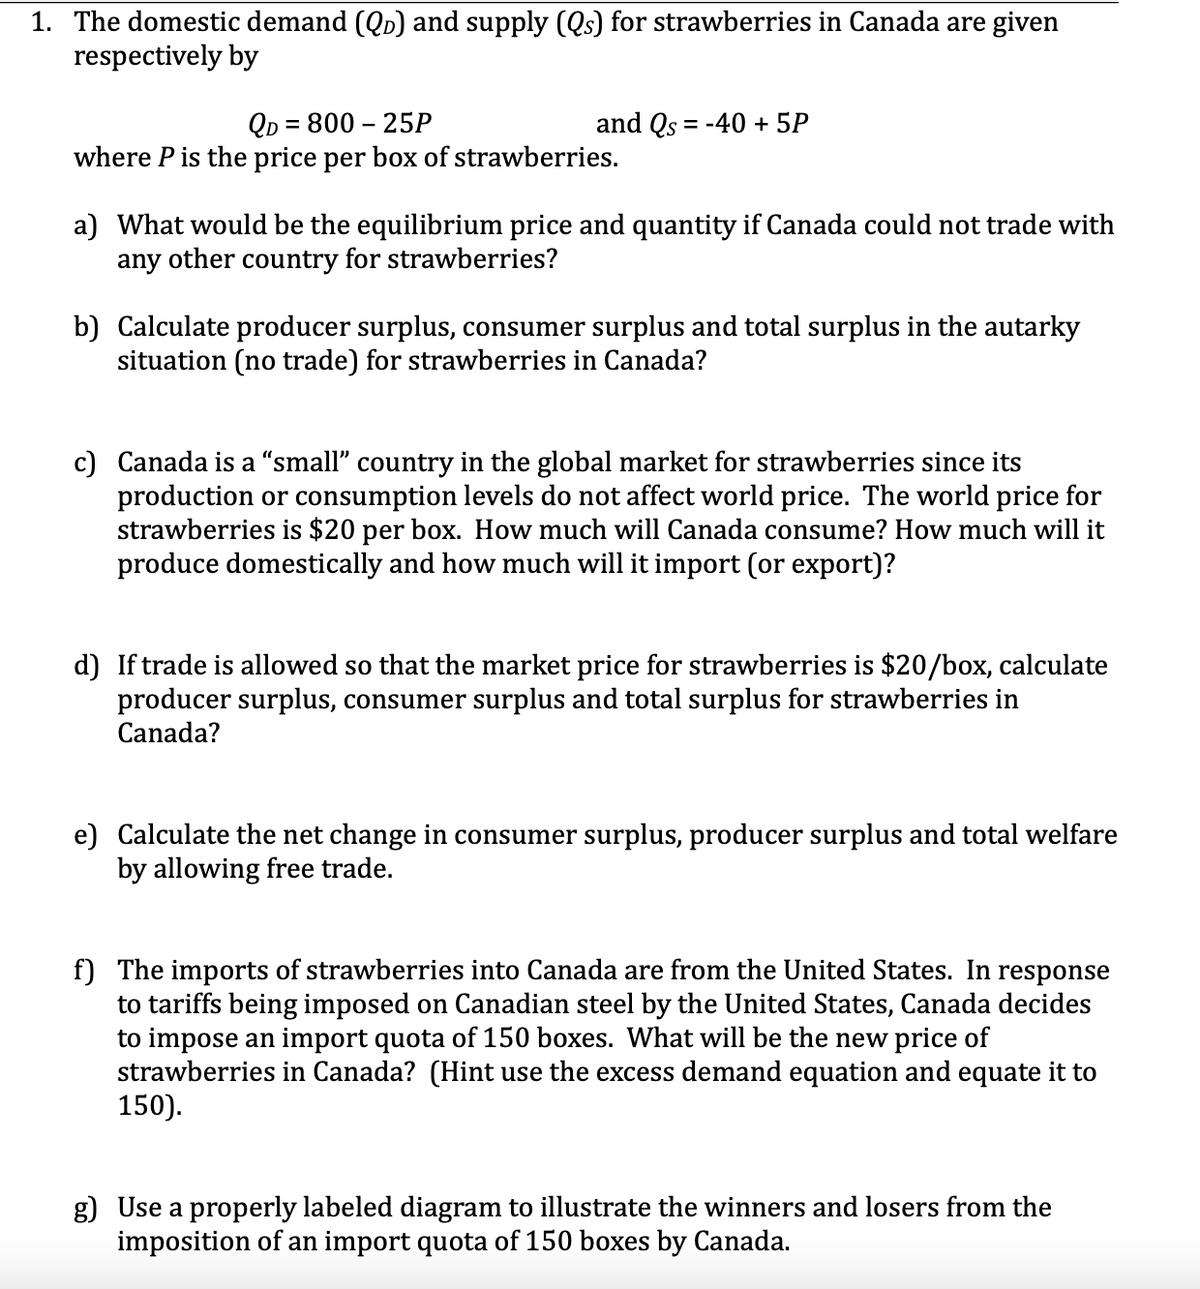 1. The domestic demand (QD) and supply (Qs) for strawberries in Canada are given
respectively by
QD = 800 – 25P
where P is the price per box of strawberries.
and Qs = -40 + 5P
a) What would be the equilibrium price and quantity if Canada could not trade with
any other country for strawberries?
b) Calculate producer surplus, consumer surplus and total surplus in the autarky
situation (no trade) for strawberries in Canada?
c) Canada is a “small" country in the global market for strawberries since its
production or consumption levels do not affect world price. The world price for
strawberries is $20 per box. How much will Canada consume? How much will it
produce domestically and how much will it import (or export)?
d) If trade is allowed so that the market price for strawberries is $20/box, calculate
producer surplus, consumer surplus and total surplus for strawberries in
Canada?
e) Calculate the net change in consumer surplus, producer surplus and total welfare
by allowing free trade.
f) The imports of strawberries into Canada are from the United States. In response
to tariffs being imposed on Canadian steel by the United States, Canada decides
to impose an import quota of 150 boxes. What will be the new price of
strawberries in Canada? (Hint use the excess demand equation and equate it to
150).
g) Use a properly labeled diagram to illustrate the winners and losers from the
imposition of an import quota of 150 boxes by Canada.
